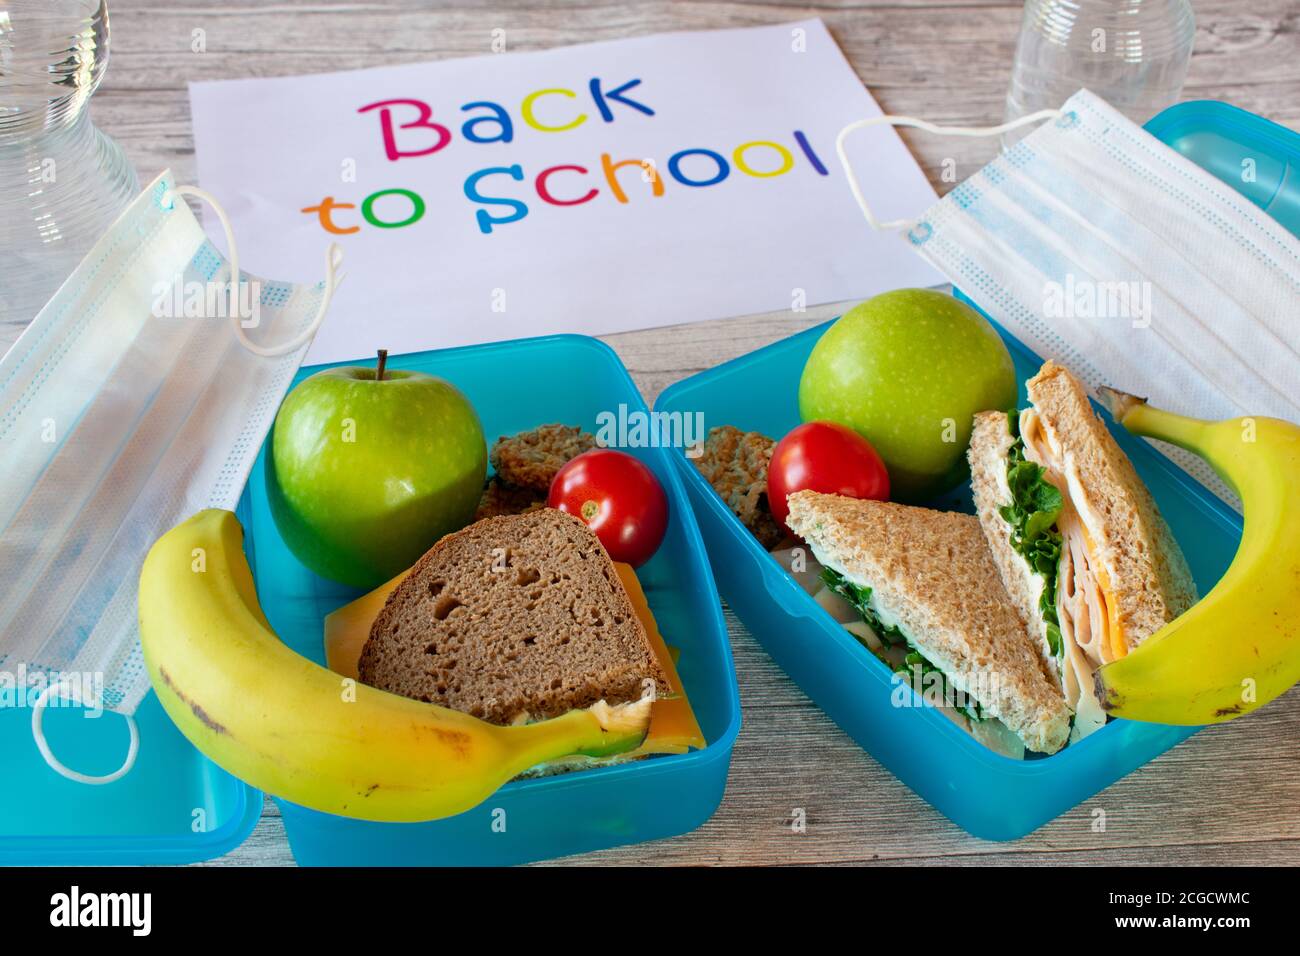 Back to school during corona - lunch box with healthy meal and mouth guard mask Stock Photo